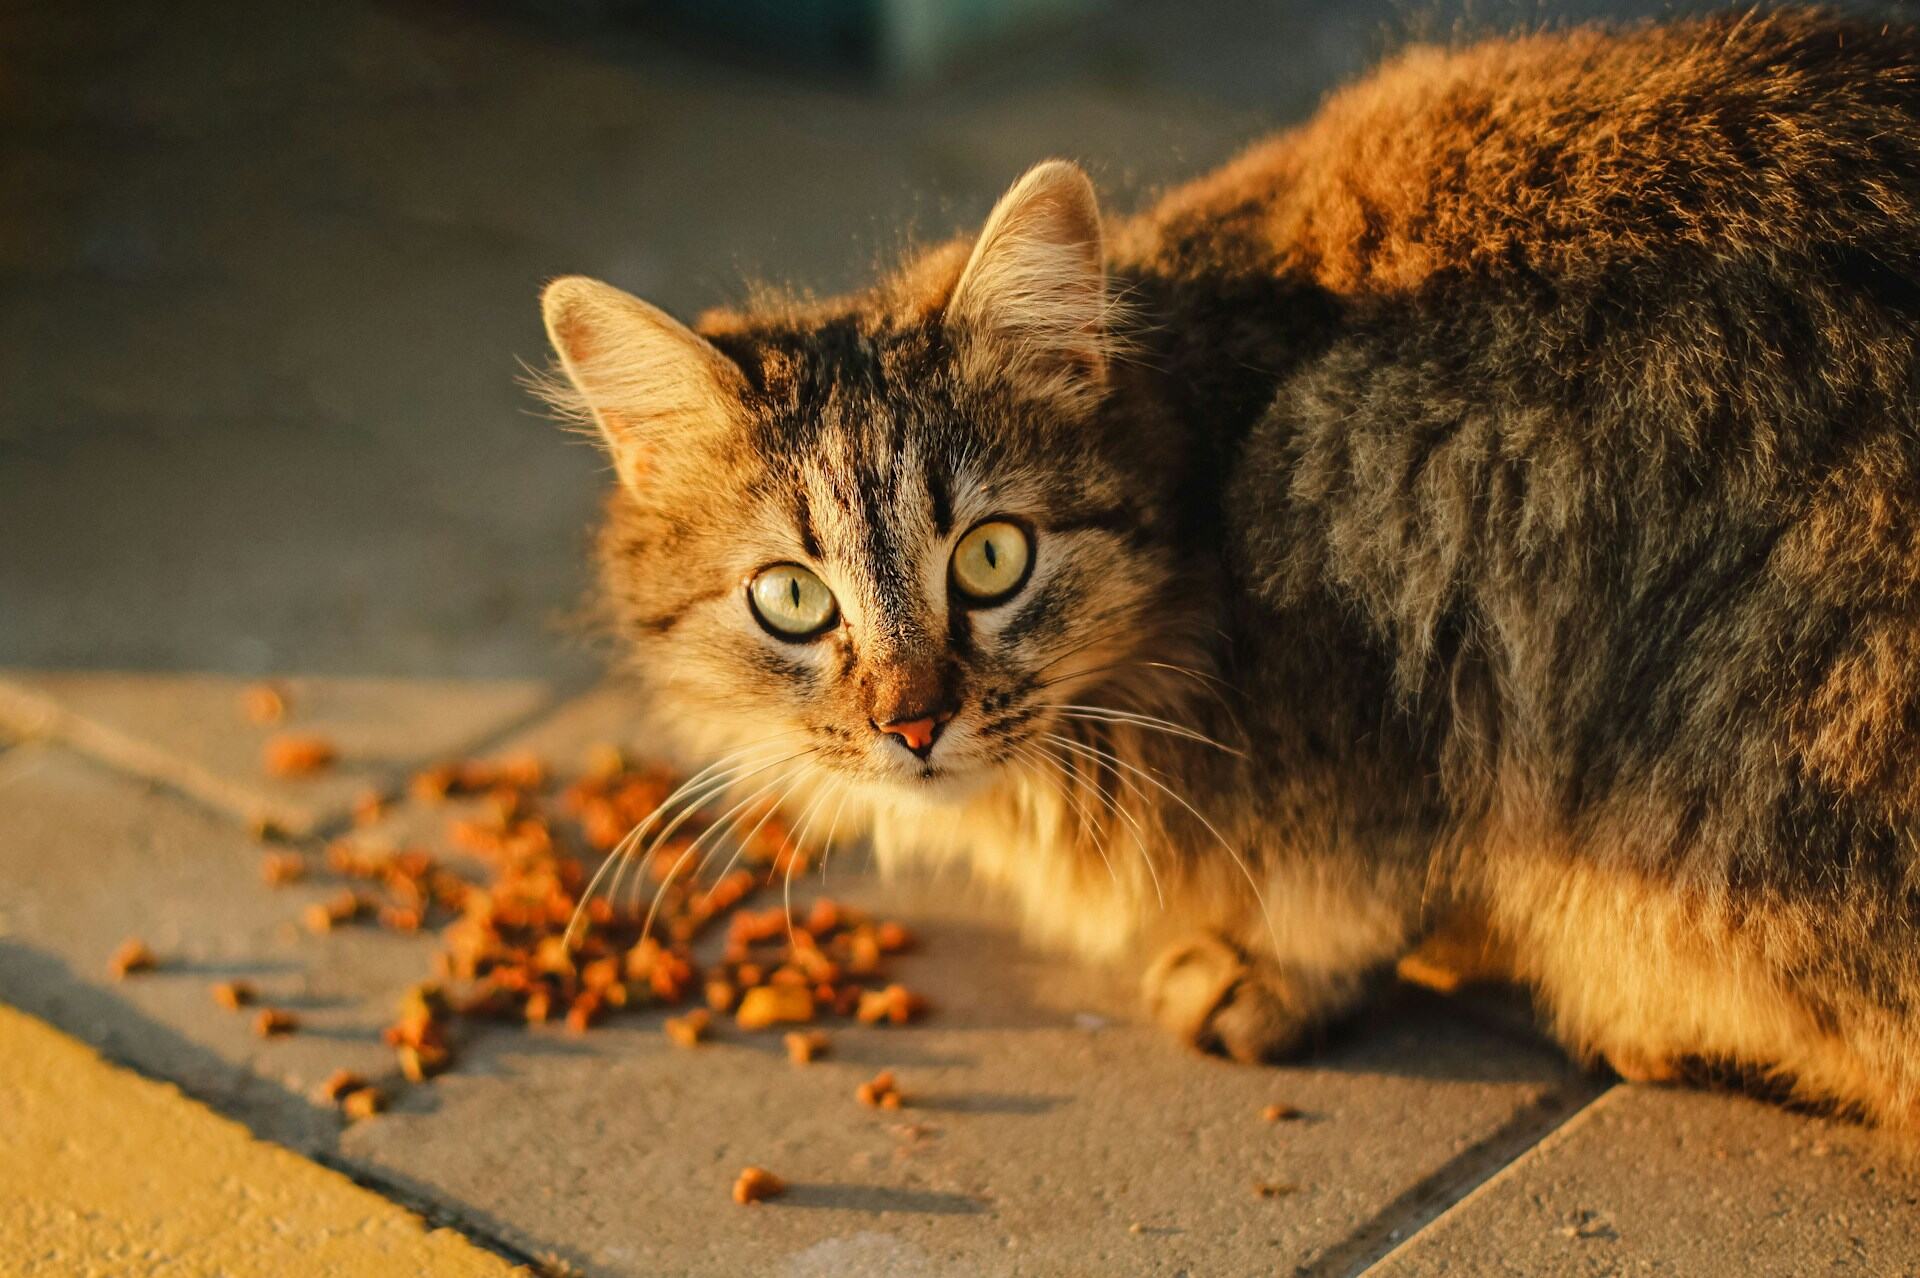 A brown cat hovering over some dry kibble on the floor